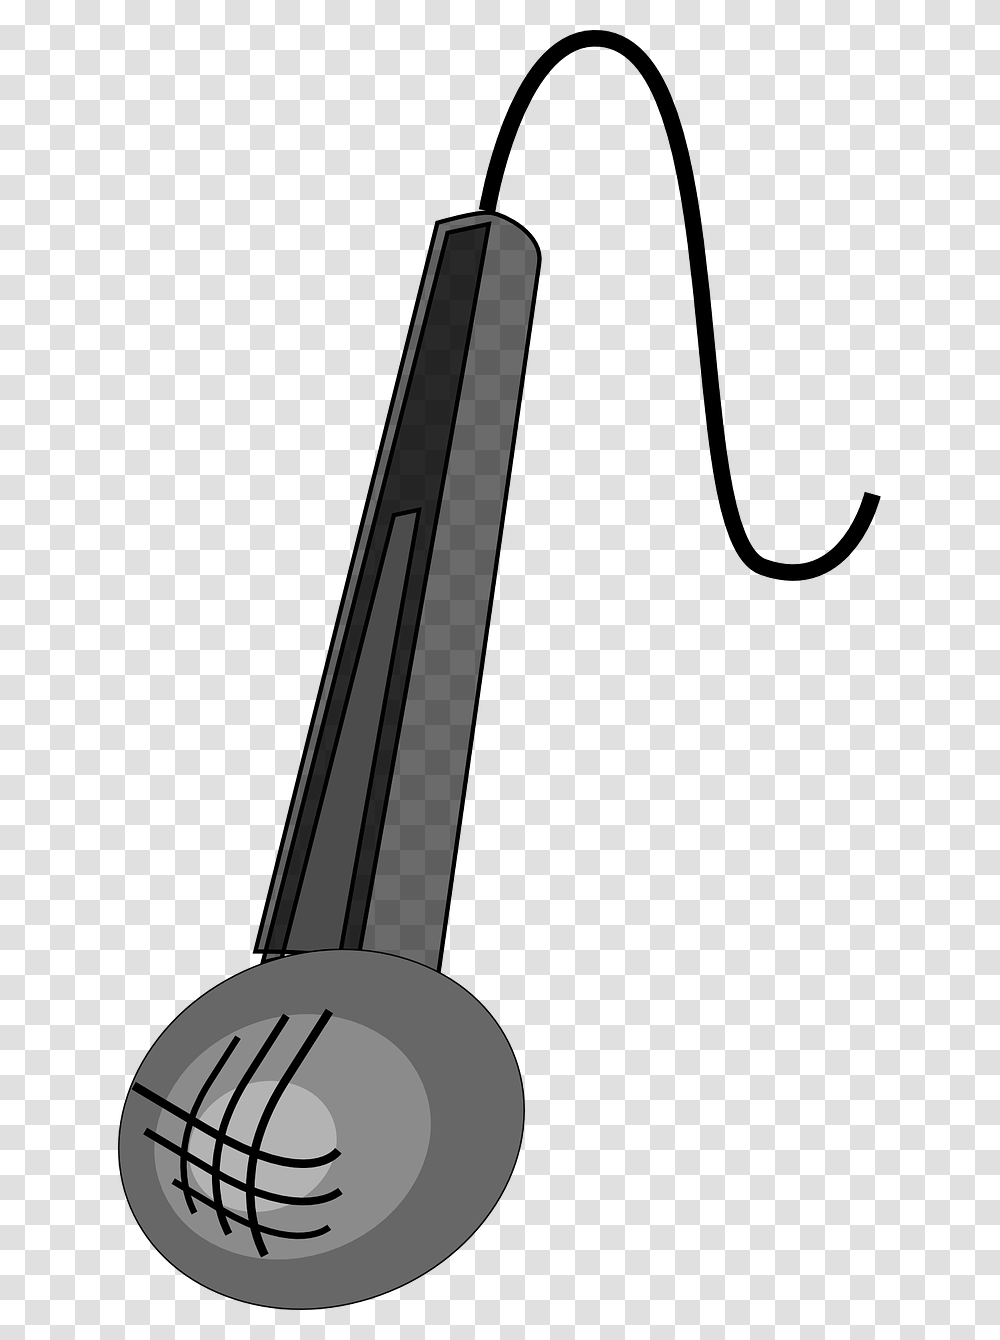 Microphone Clip Art, Antenna, Electrical Device, Silhouette, Electronics Transparent Png